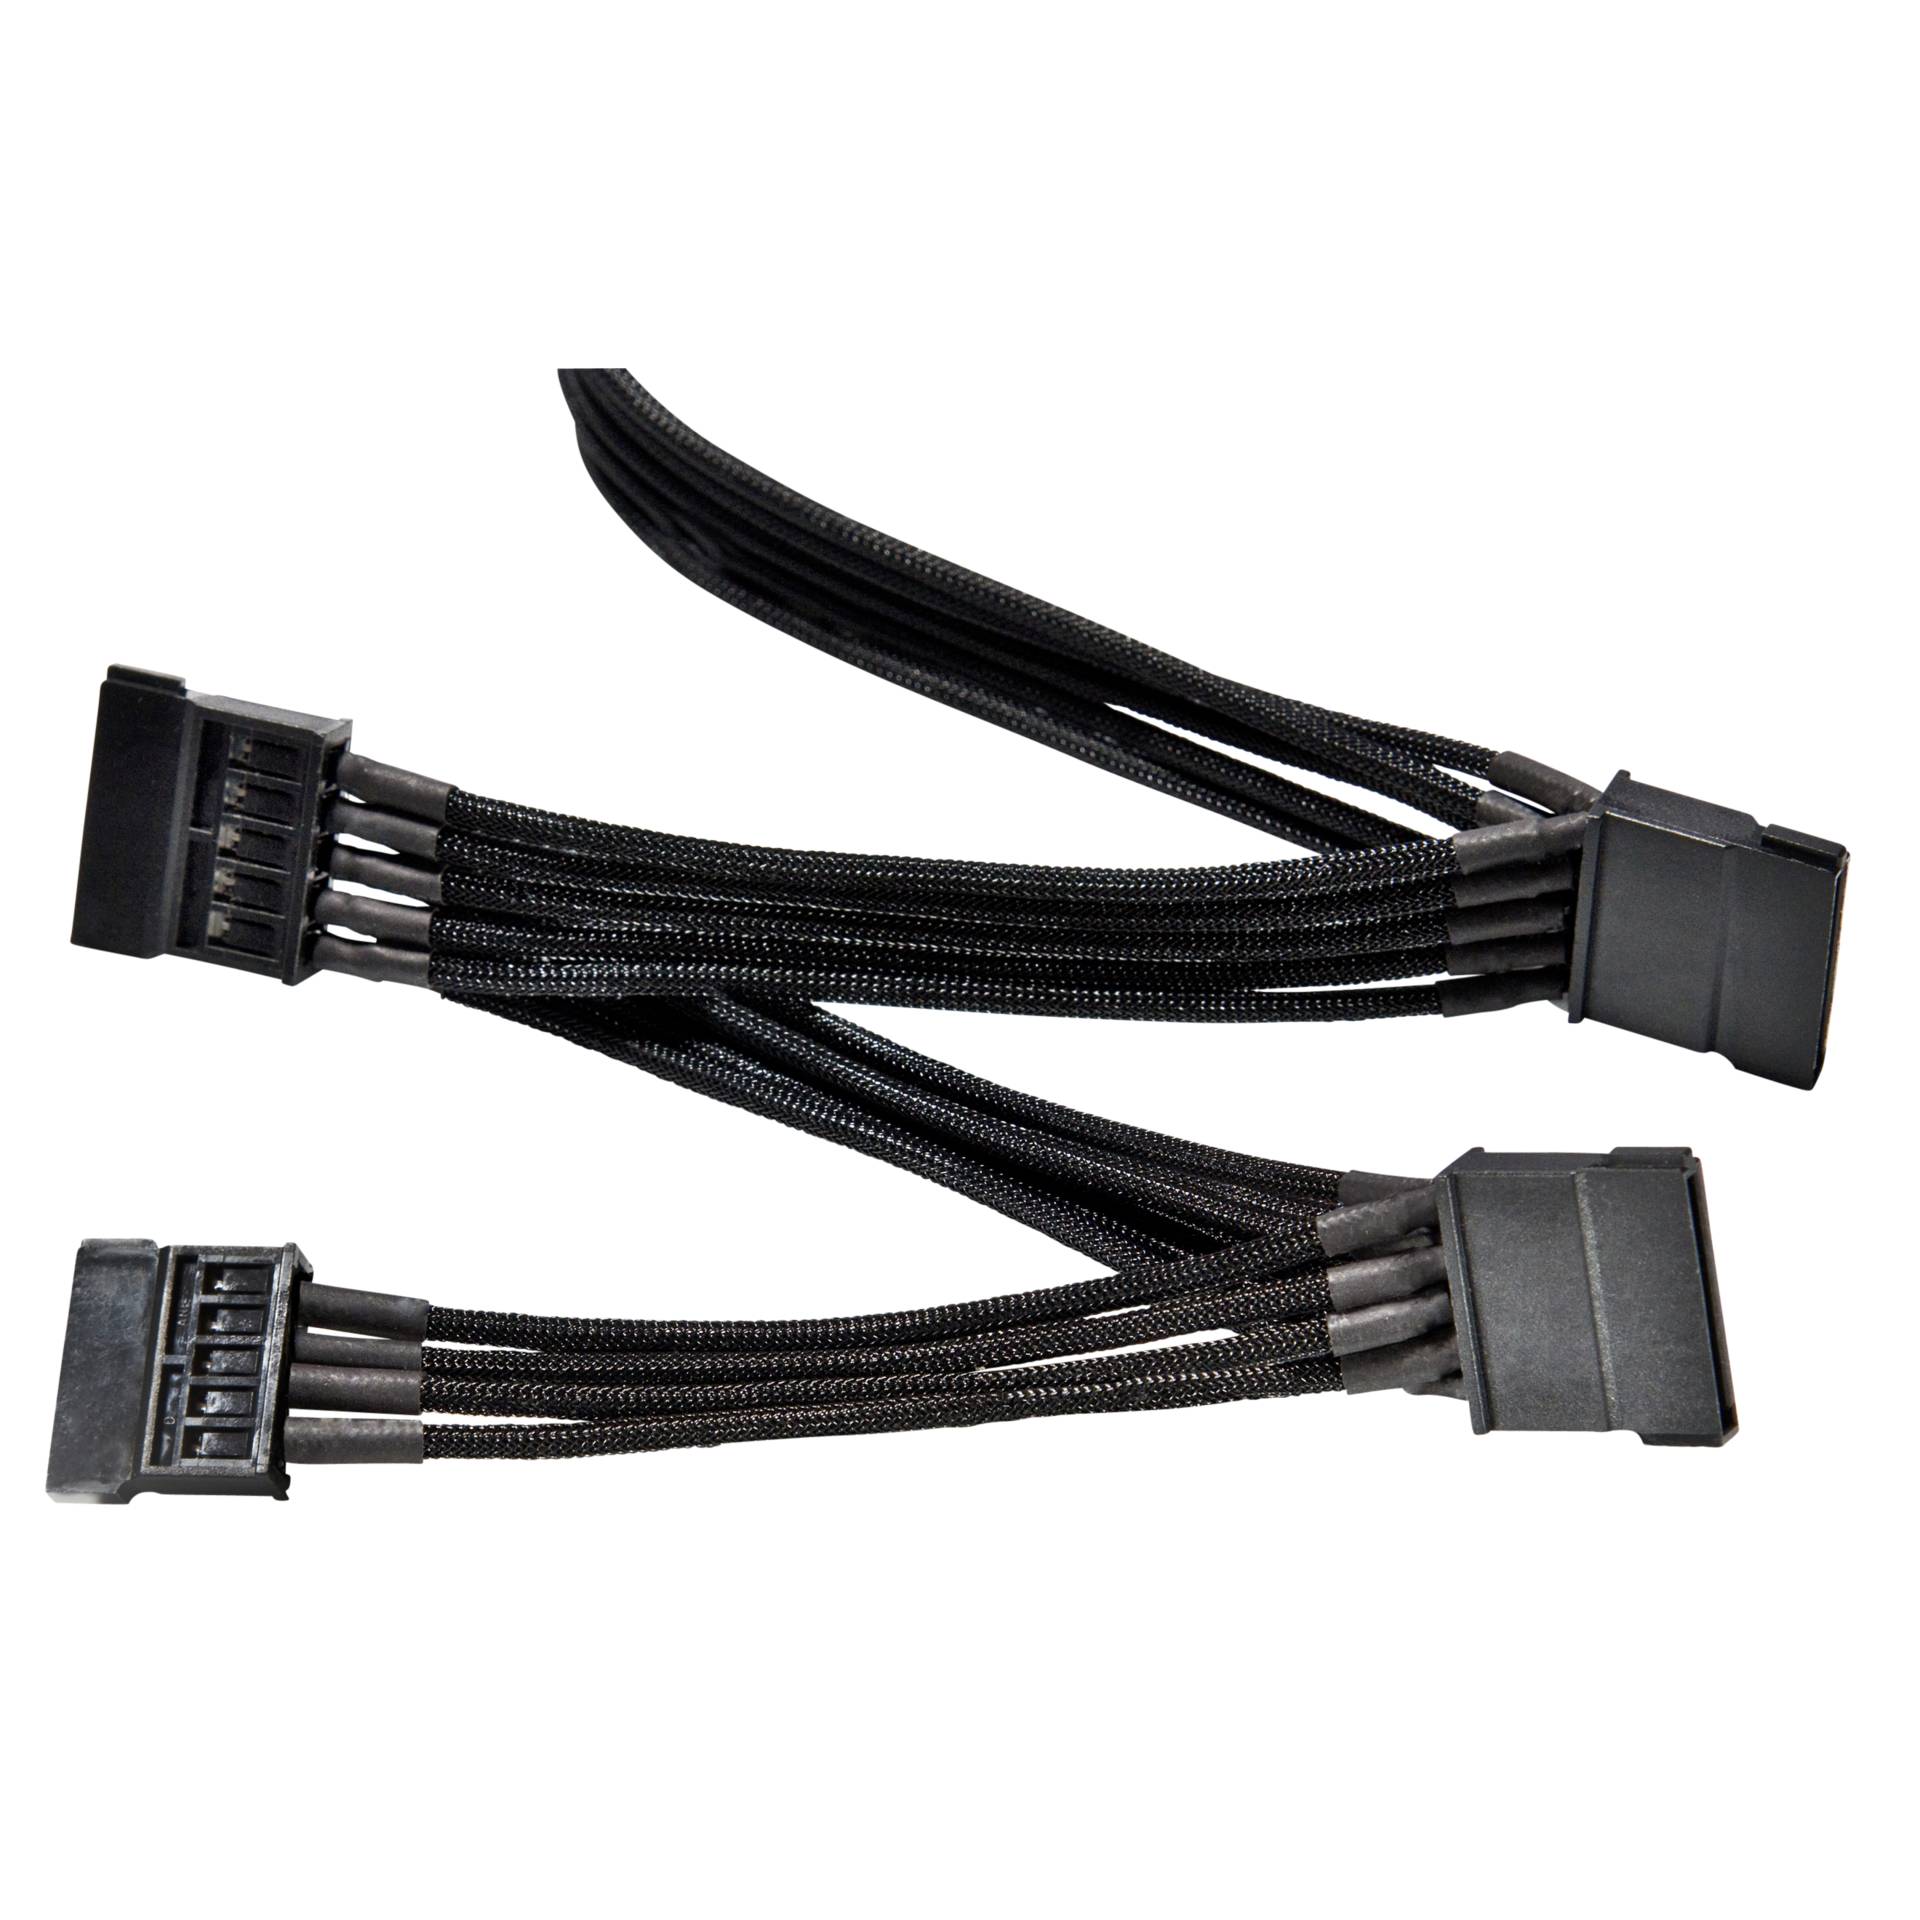 0,9m 4x SATA be quiet! Sleeved Power Cable CS-694 